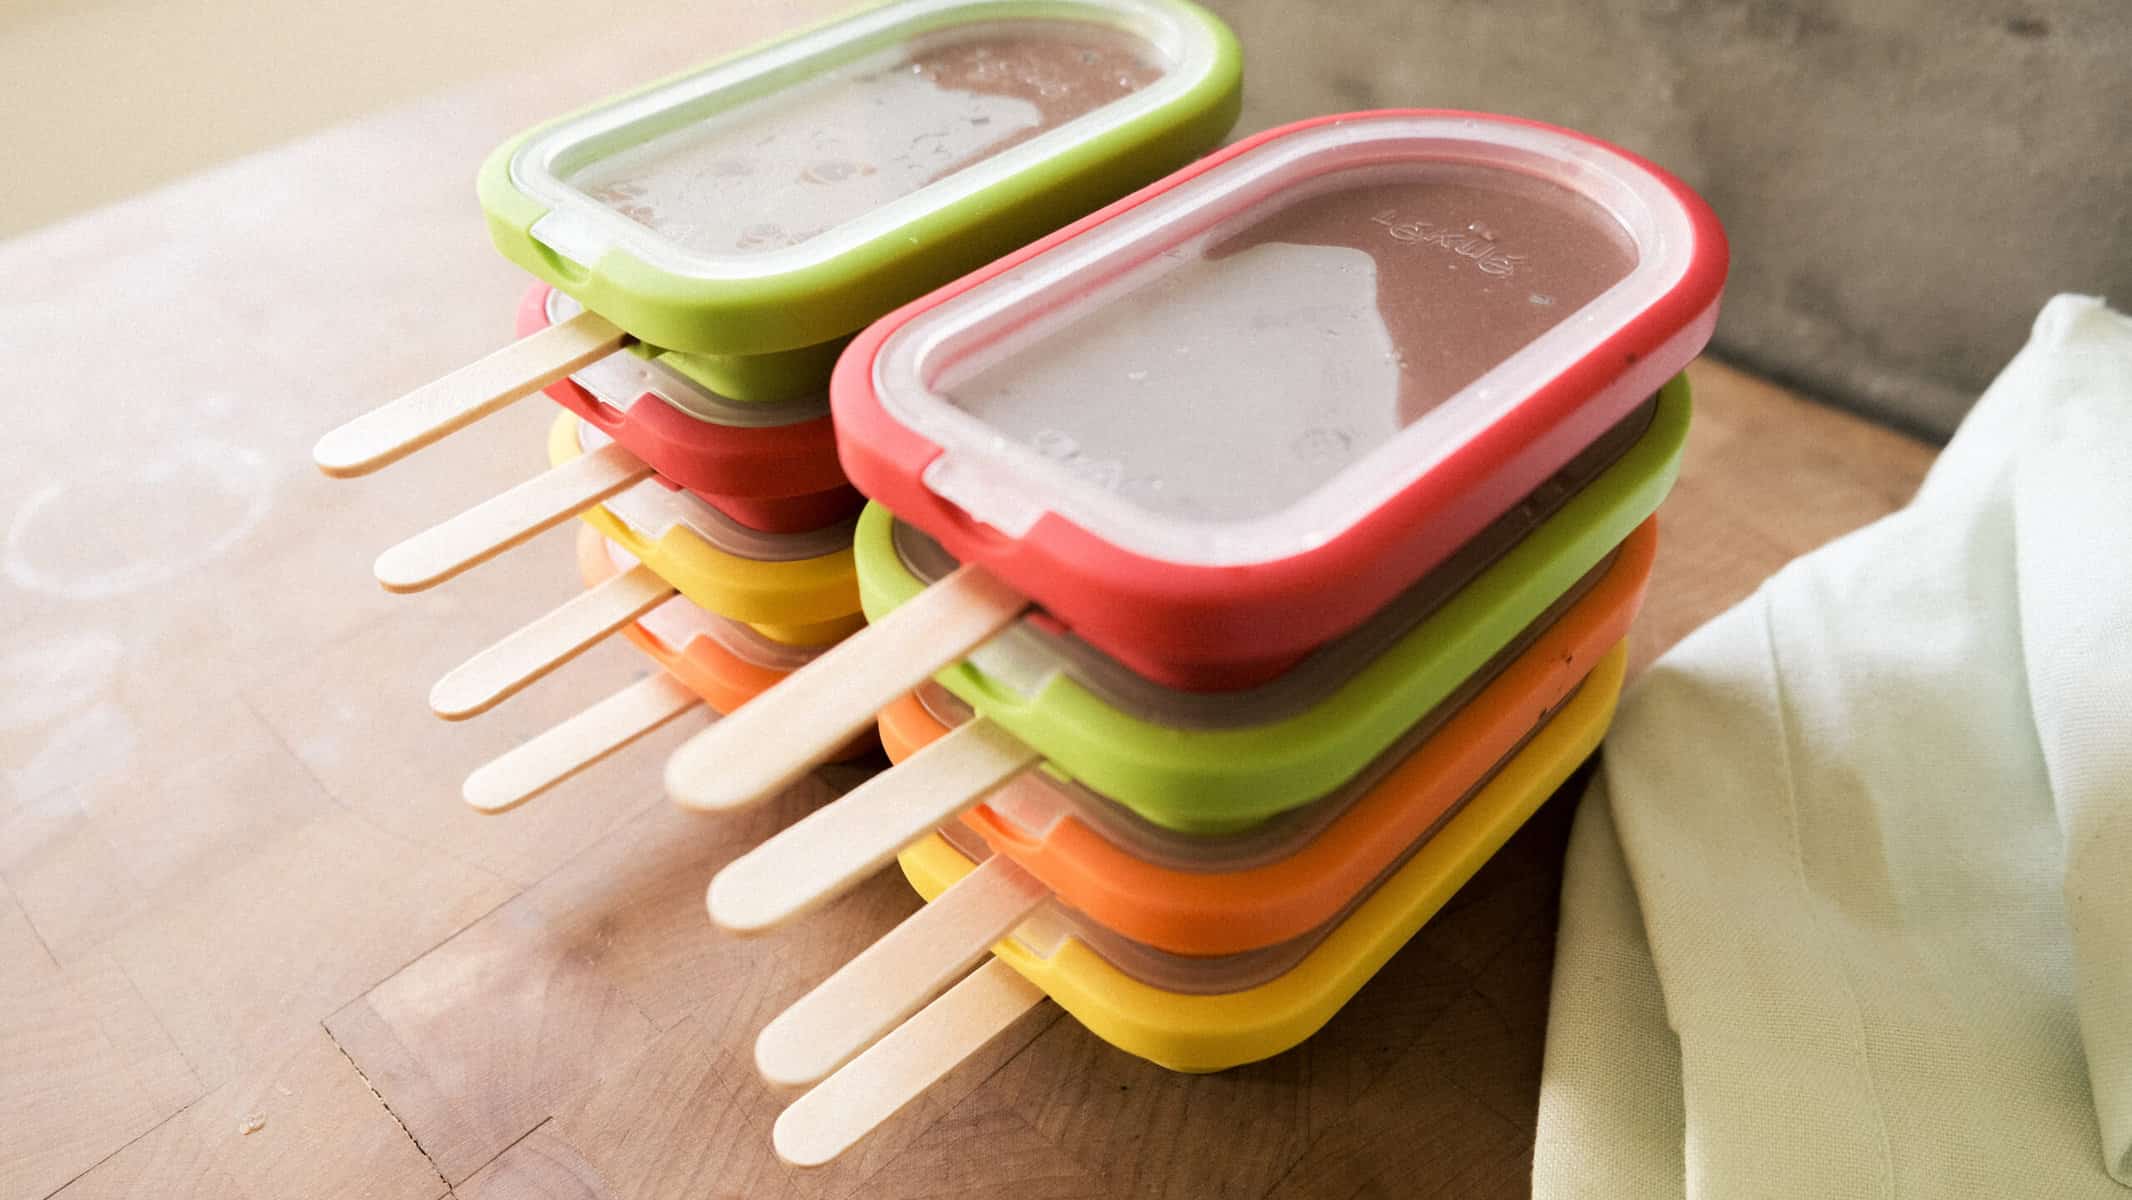 popsicle molds